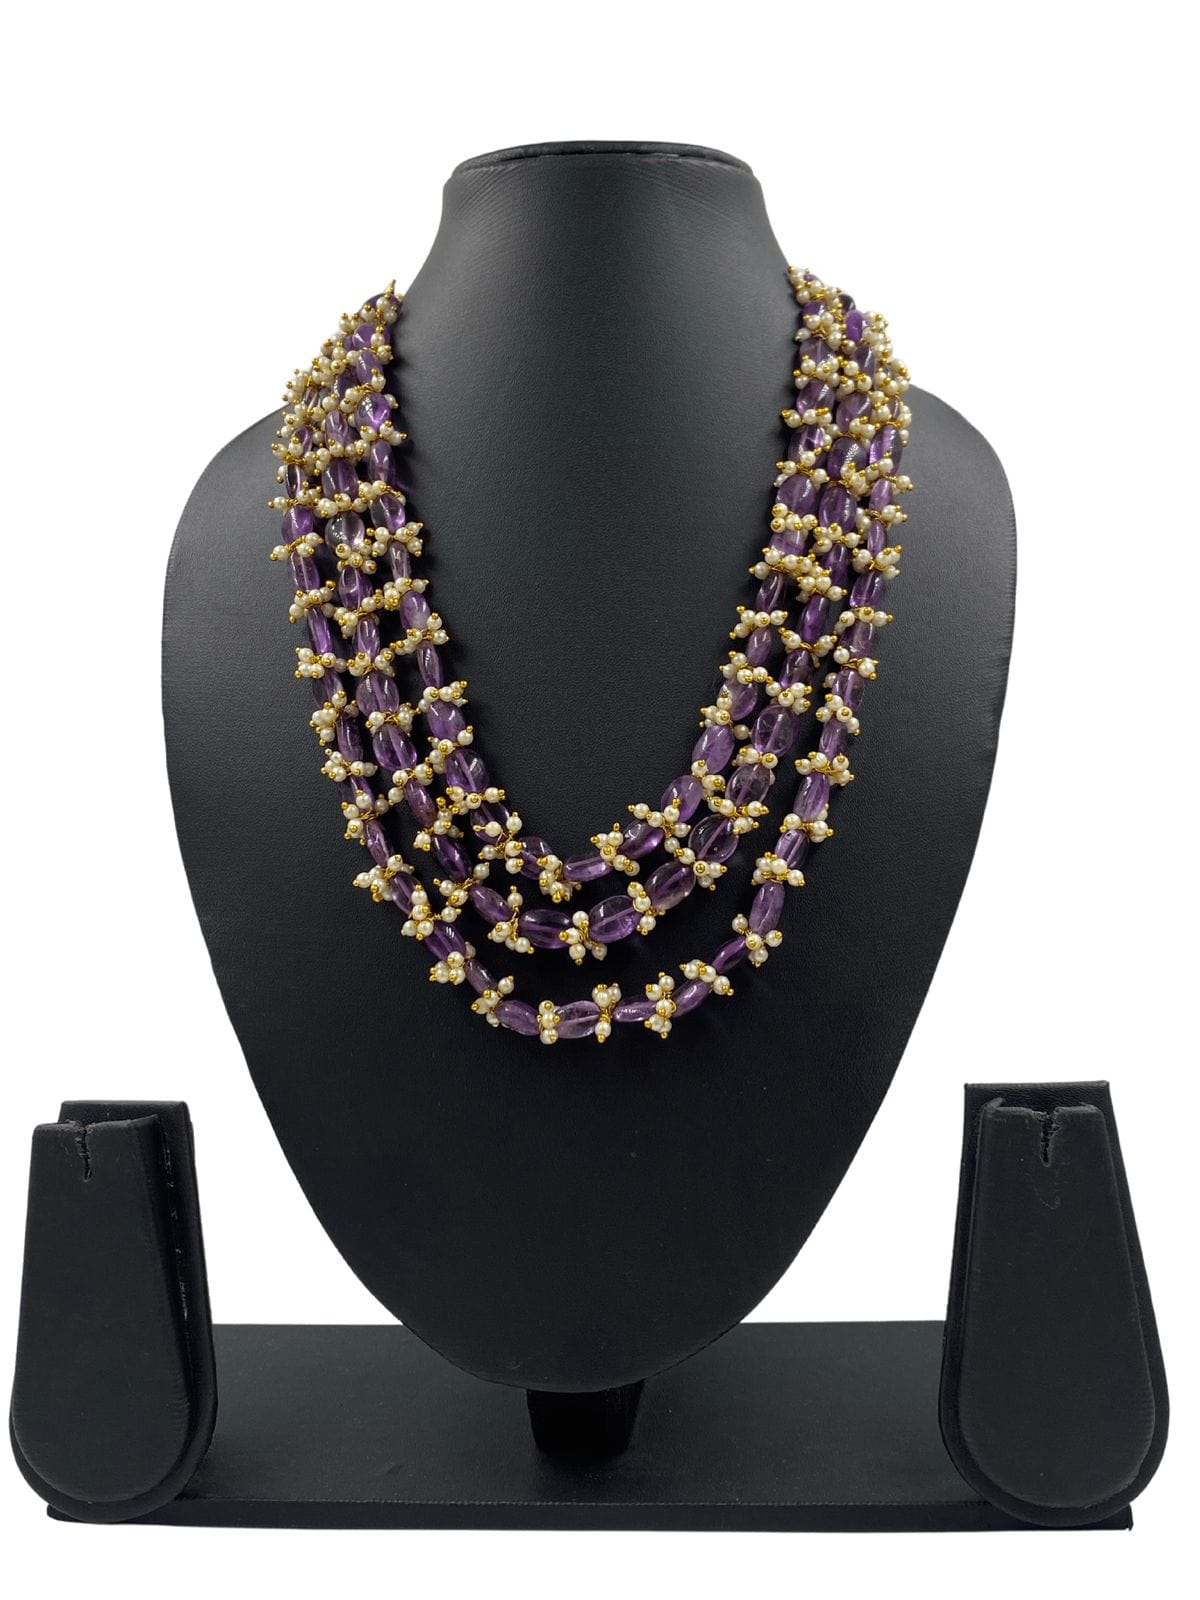 Handcrafted Semi Precious Amethyst Layered Beads Necklace For Women. Beads Jewellery